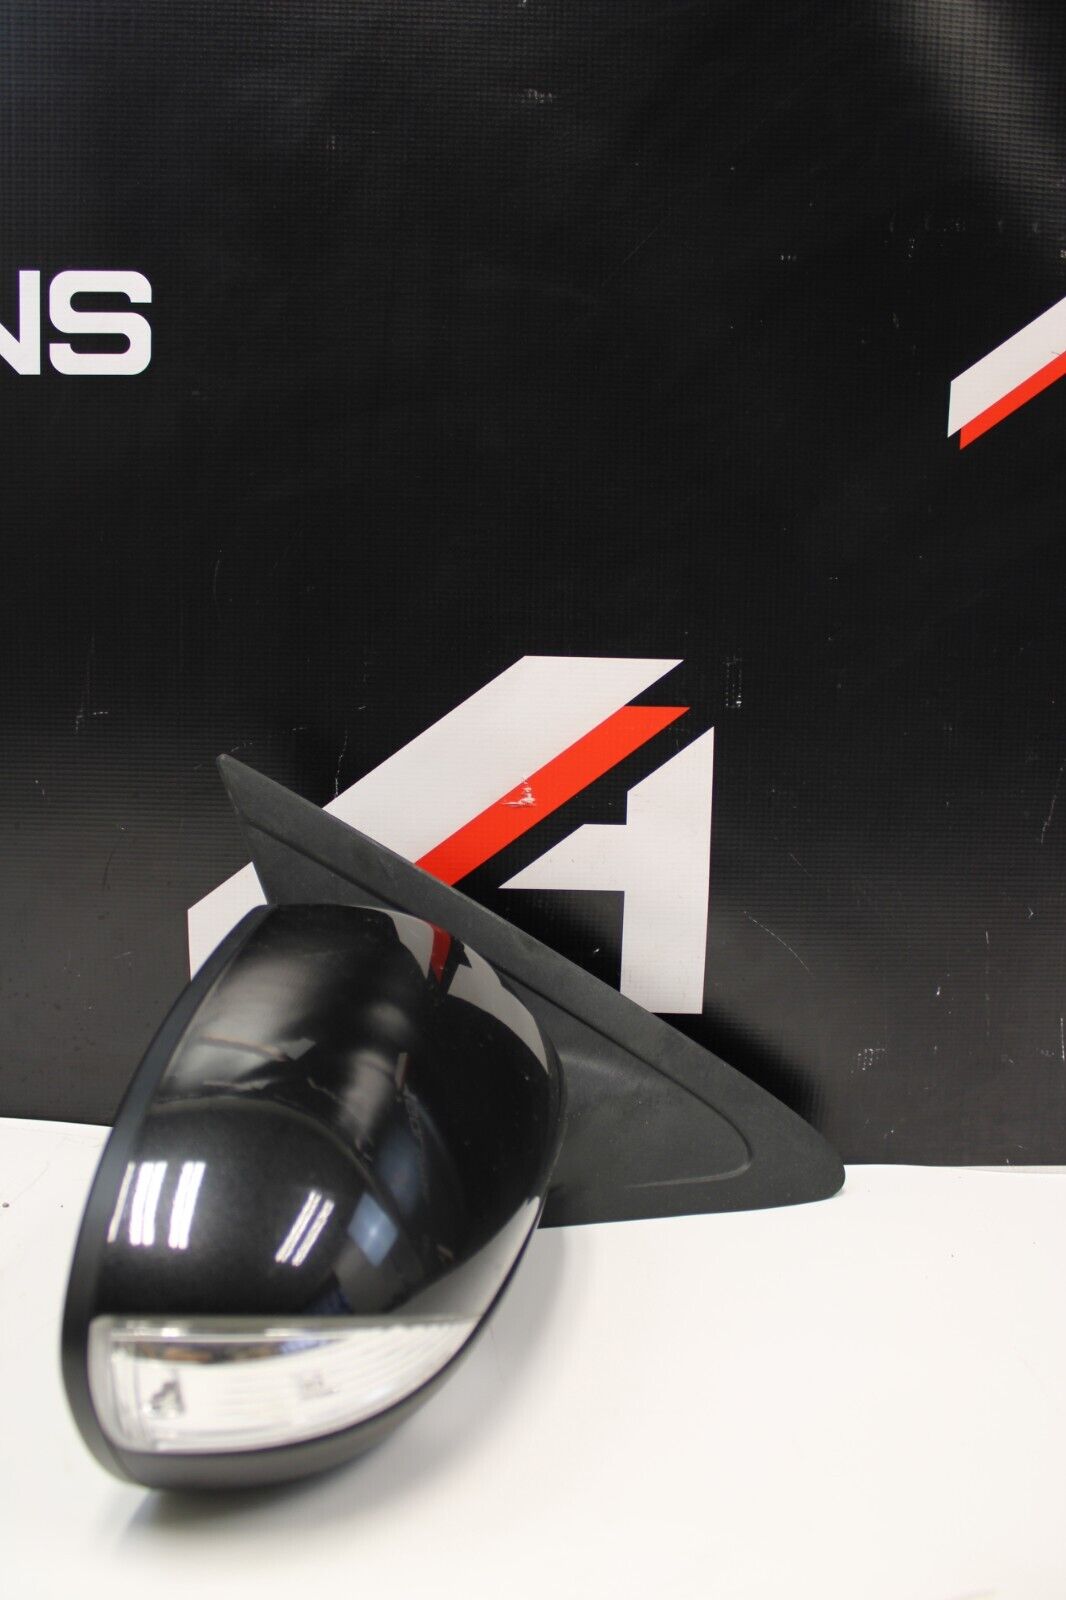 2010-2013 Mazdaspeed 3 MS3 OEM Factory Right RH Side View Mirror